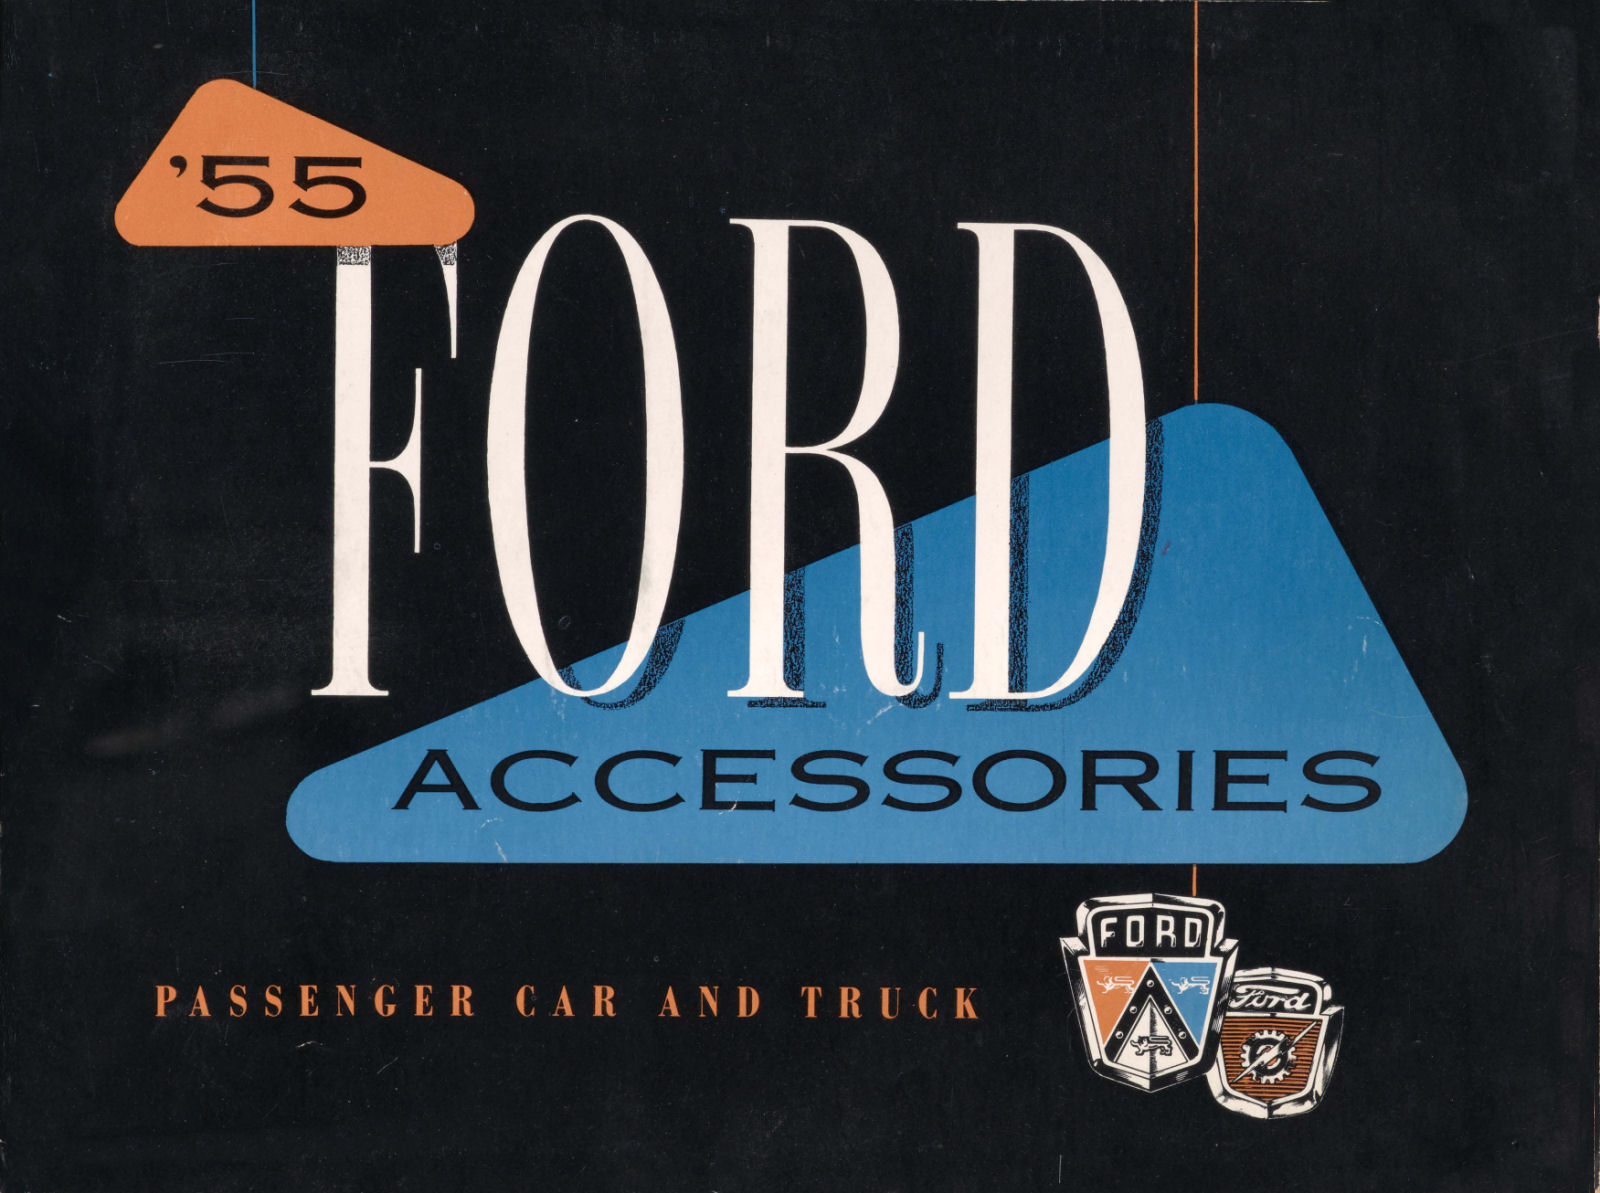 1955 Ford Accessories-00